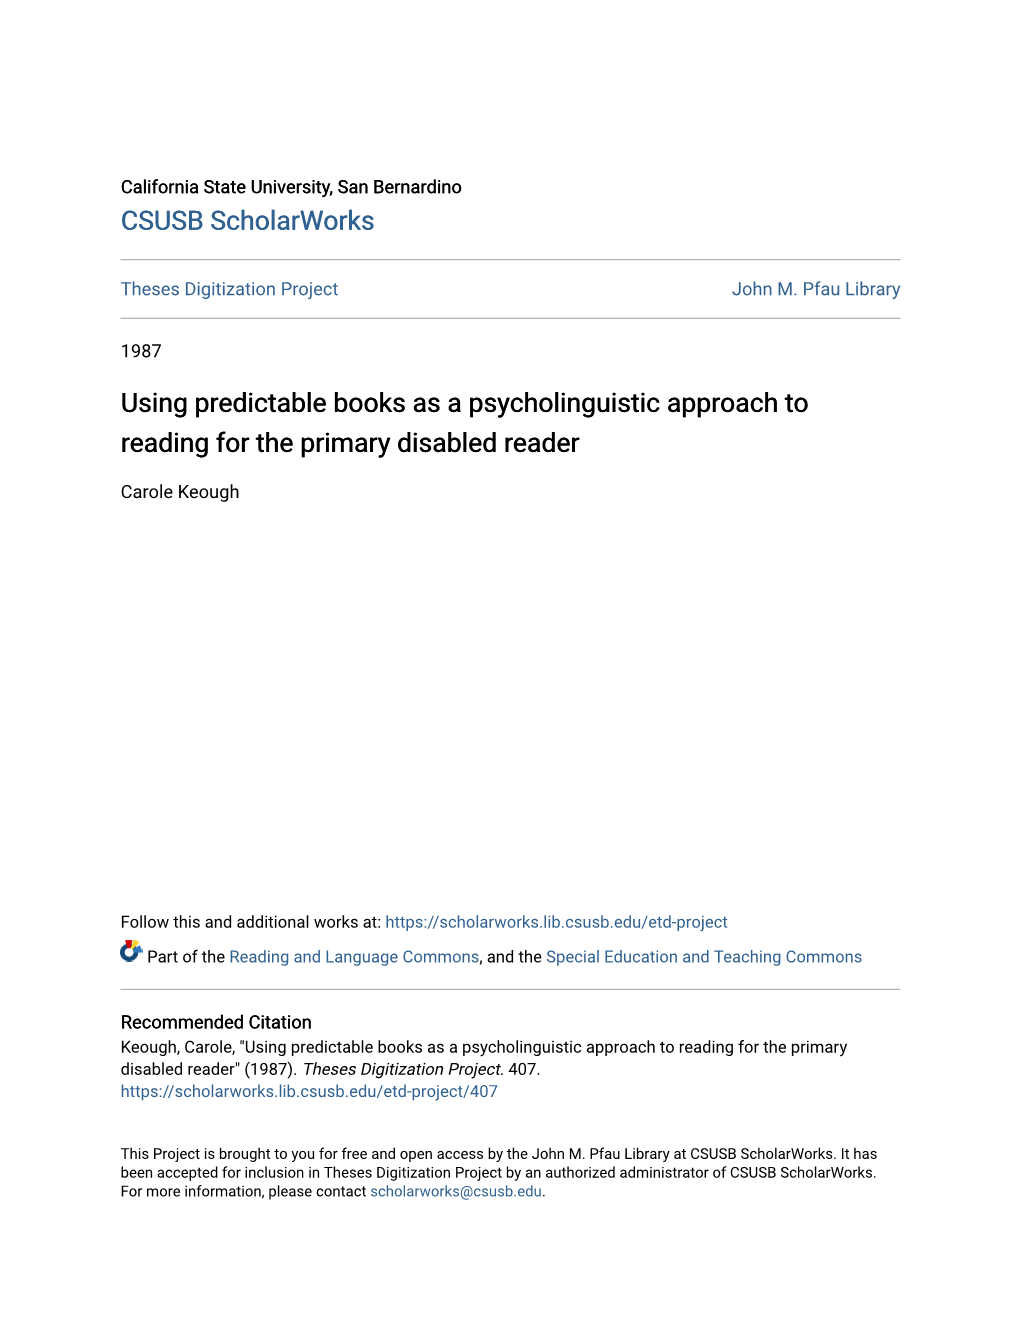 Using Predictable Books As a Psycholinguistic Approach to Reading for the Primary Disabled Reader